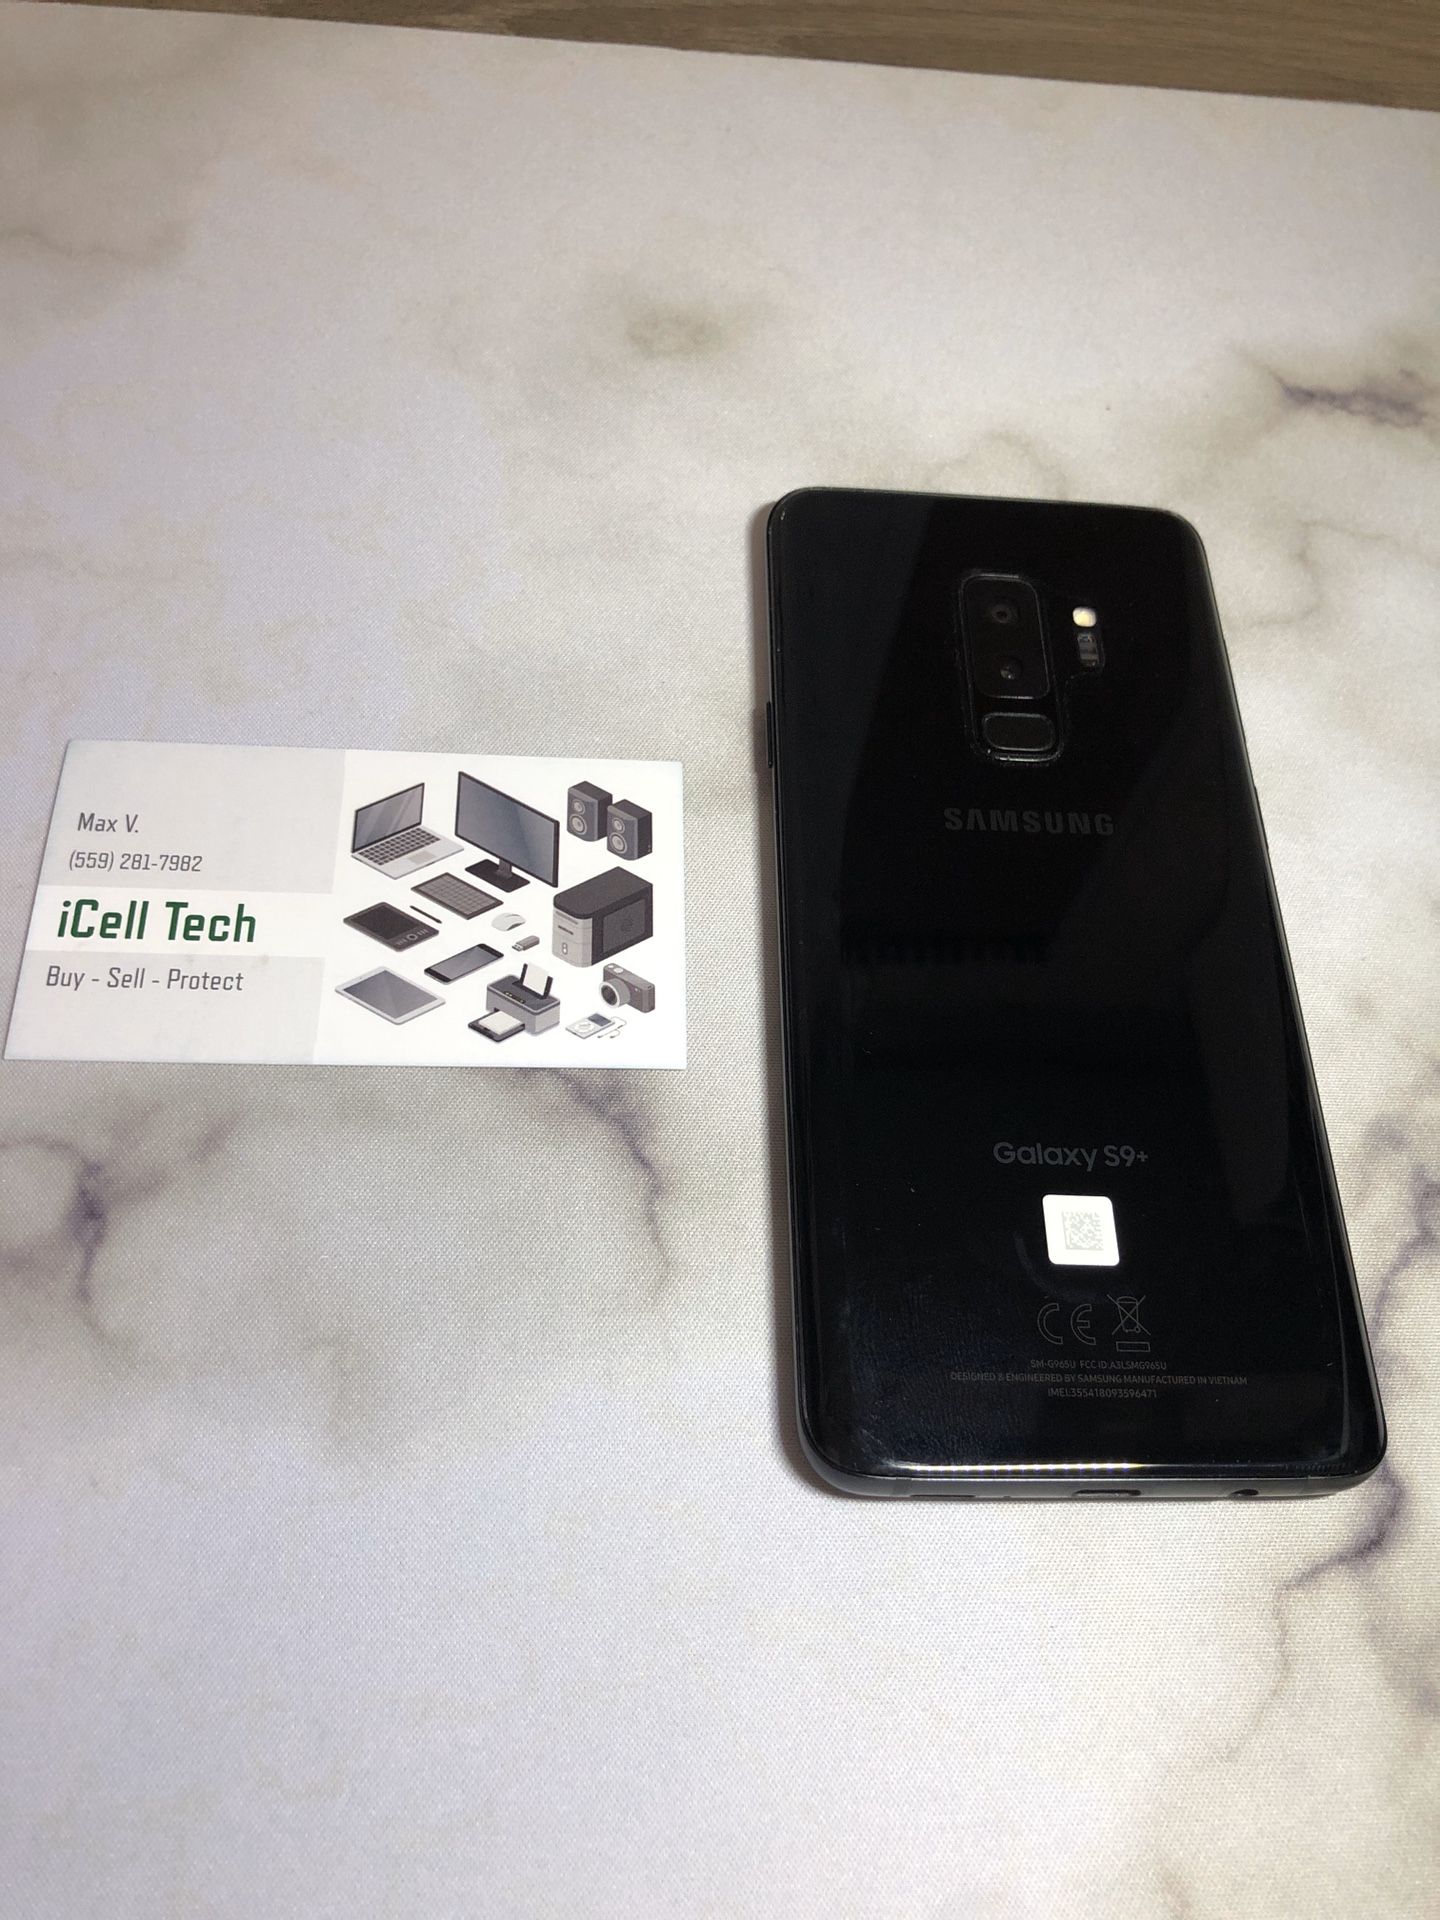 Samsung Galaxy S9 Plus Unlock for any carrier. At&t and Cricket Carrier. T-mobile and Metro PCS etc.